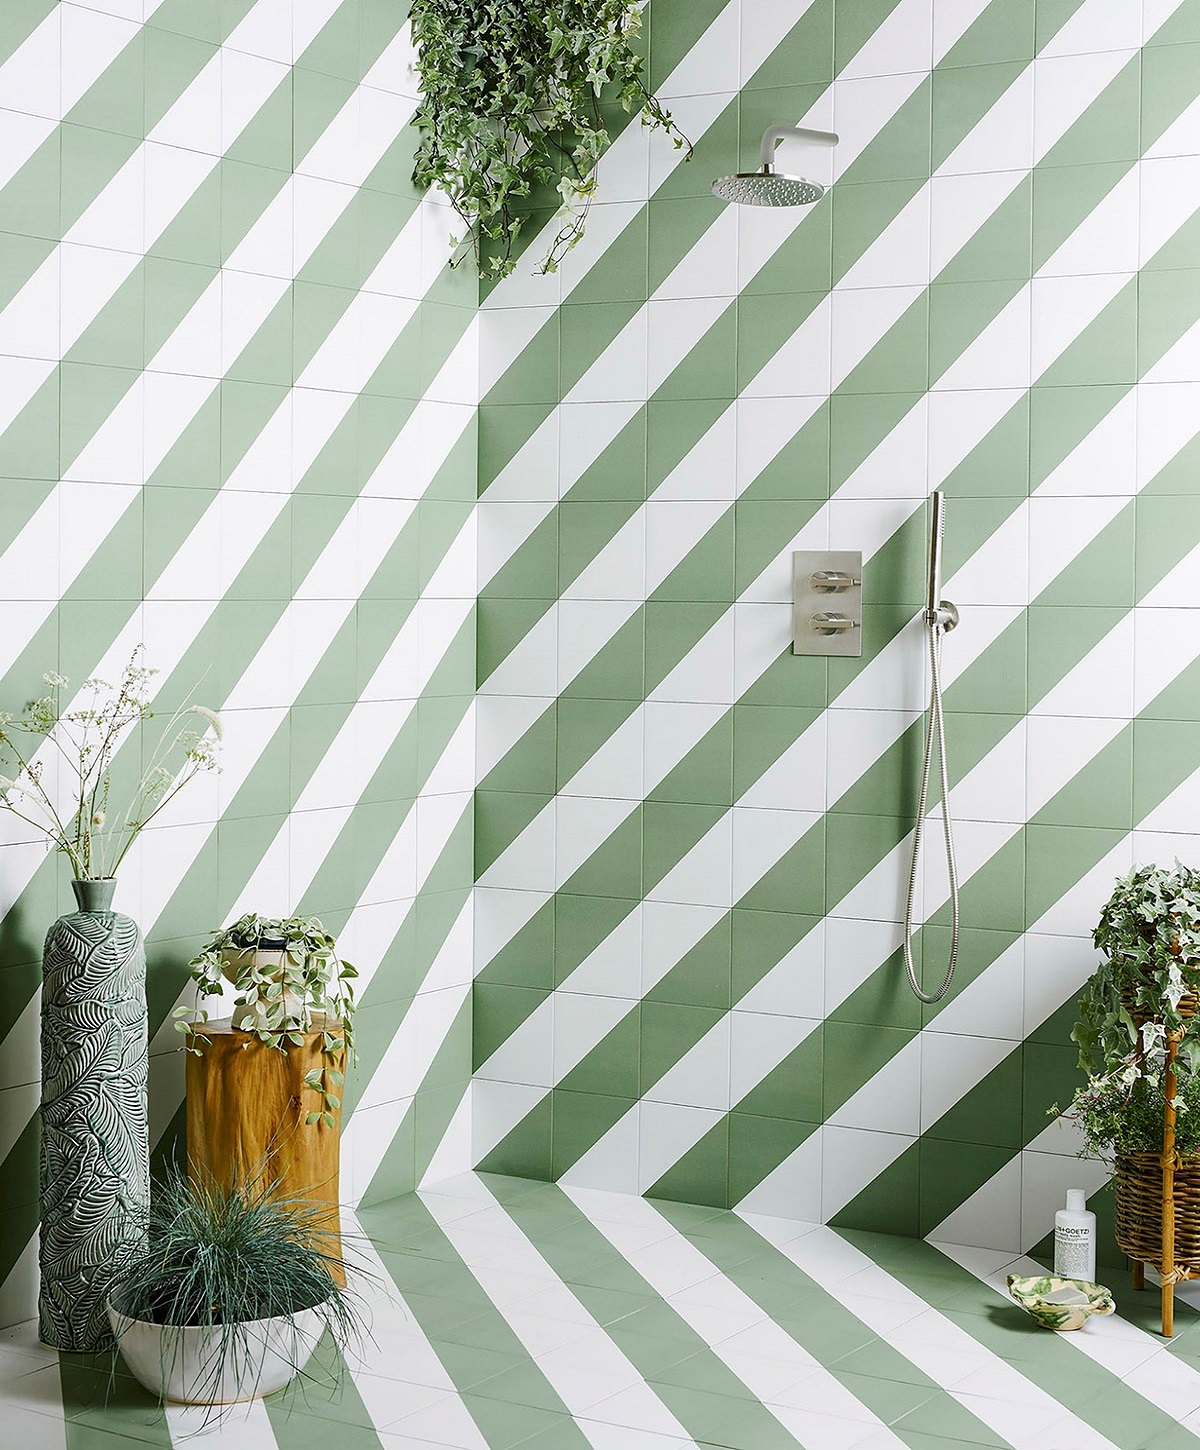 bold mint green and white tiled stripes in a wetroom using Green Alalpardo porcelain tiles by Bert & May for Hyperion tiles